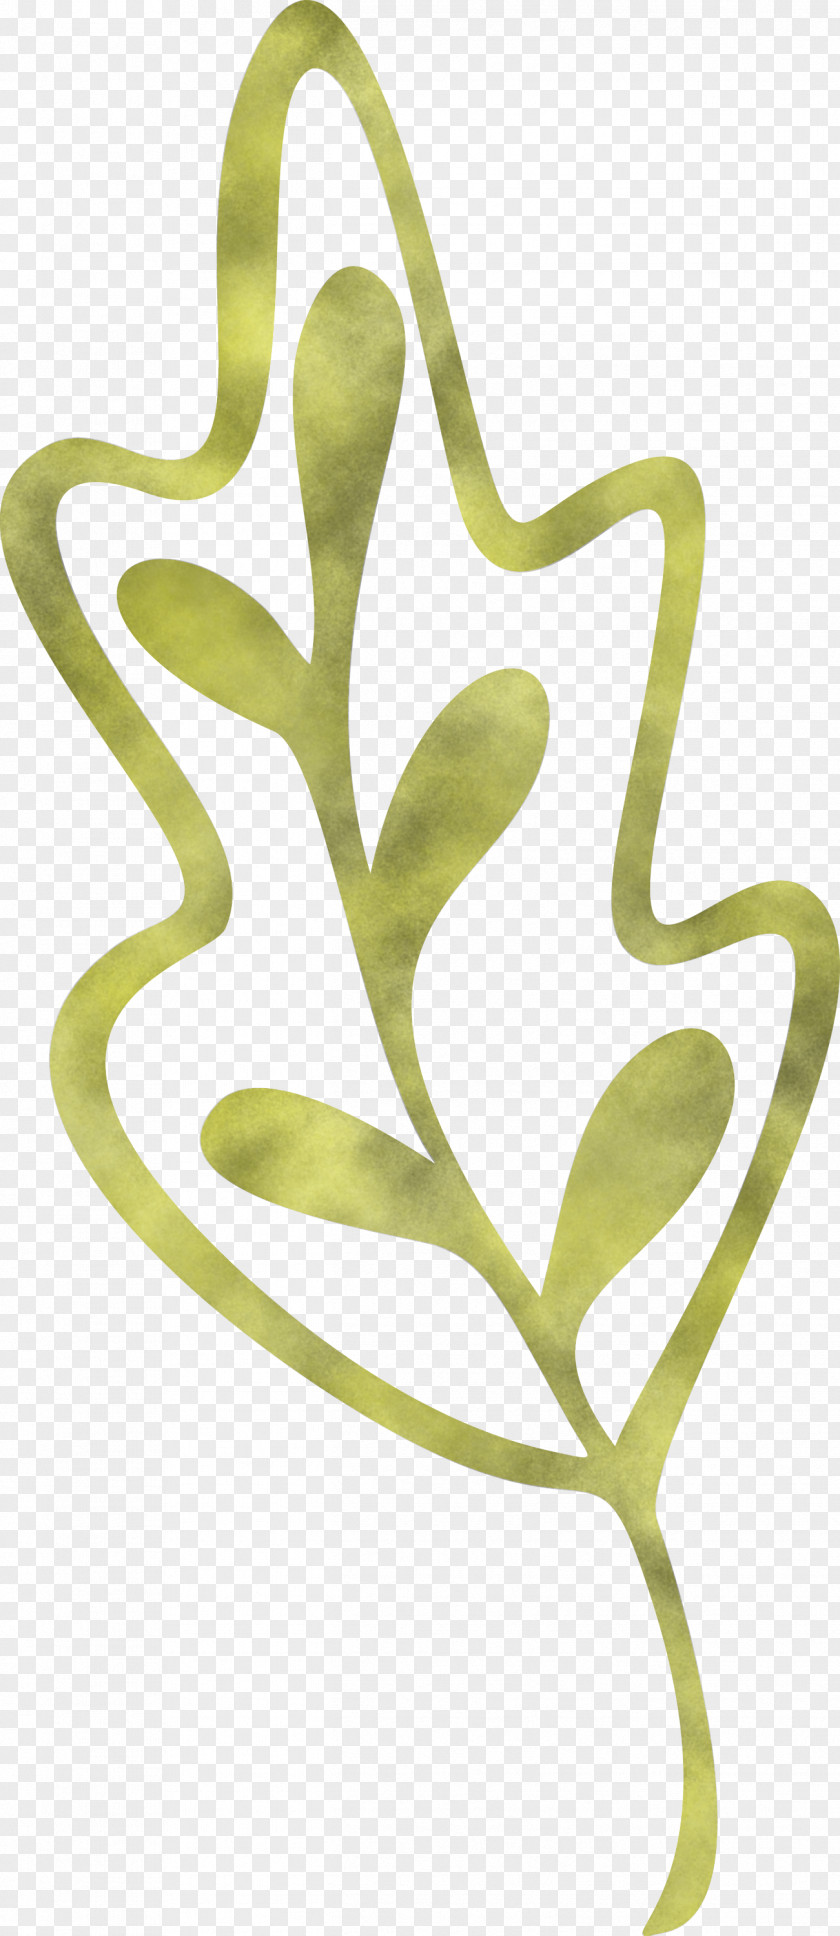 Leaf Plant Stem Drawing Watercolor Painting Tree PNG